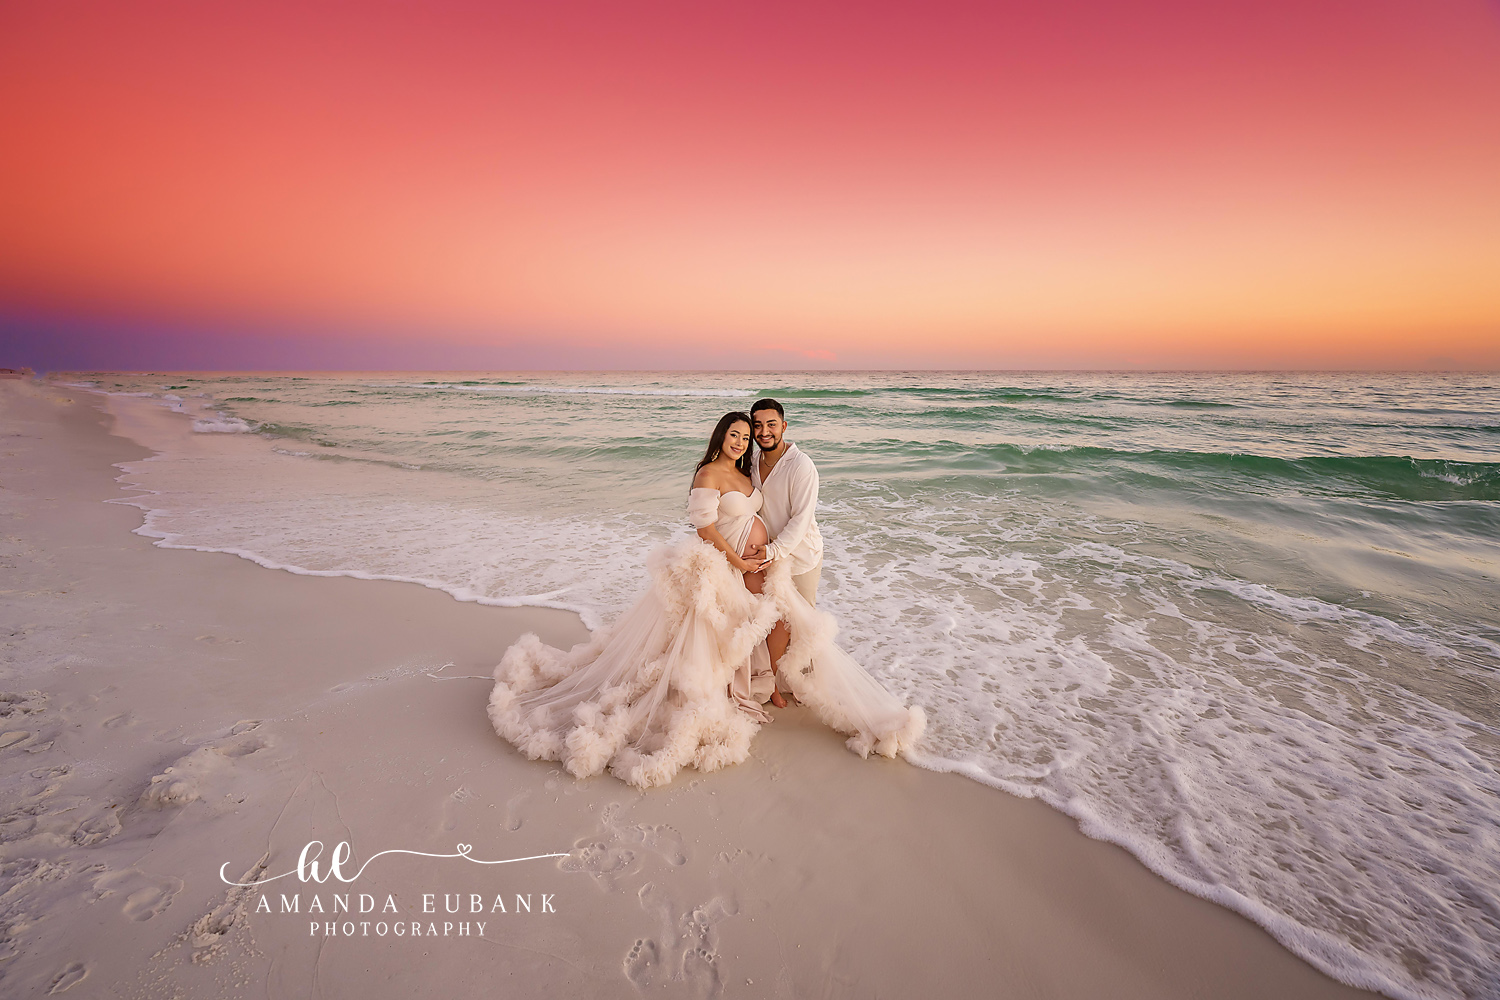 30A Maternity Photographer, Dune Allen Maternity Photographer, Destin Maternity Photographer, 30A Photographer, Miramar Beach Photographer, Rosemary beach Photographer, Santa Rosa Beach Photographer, Seaside Beach Photographer, Watercolor Photographer, Watersound Photographer